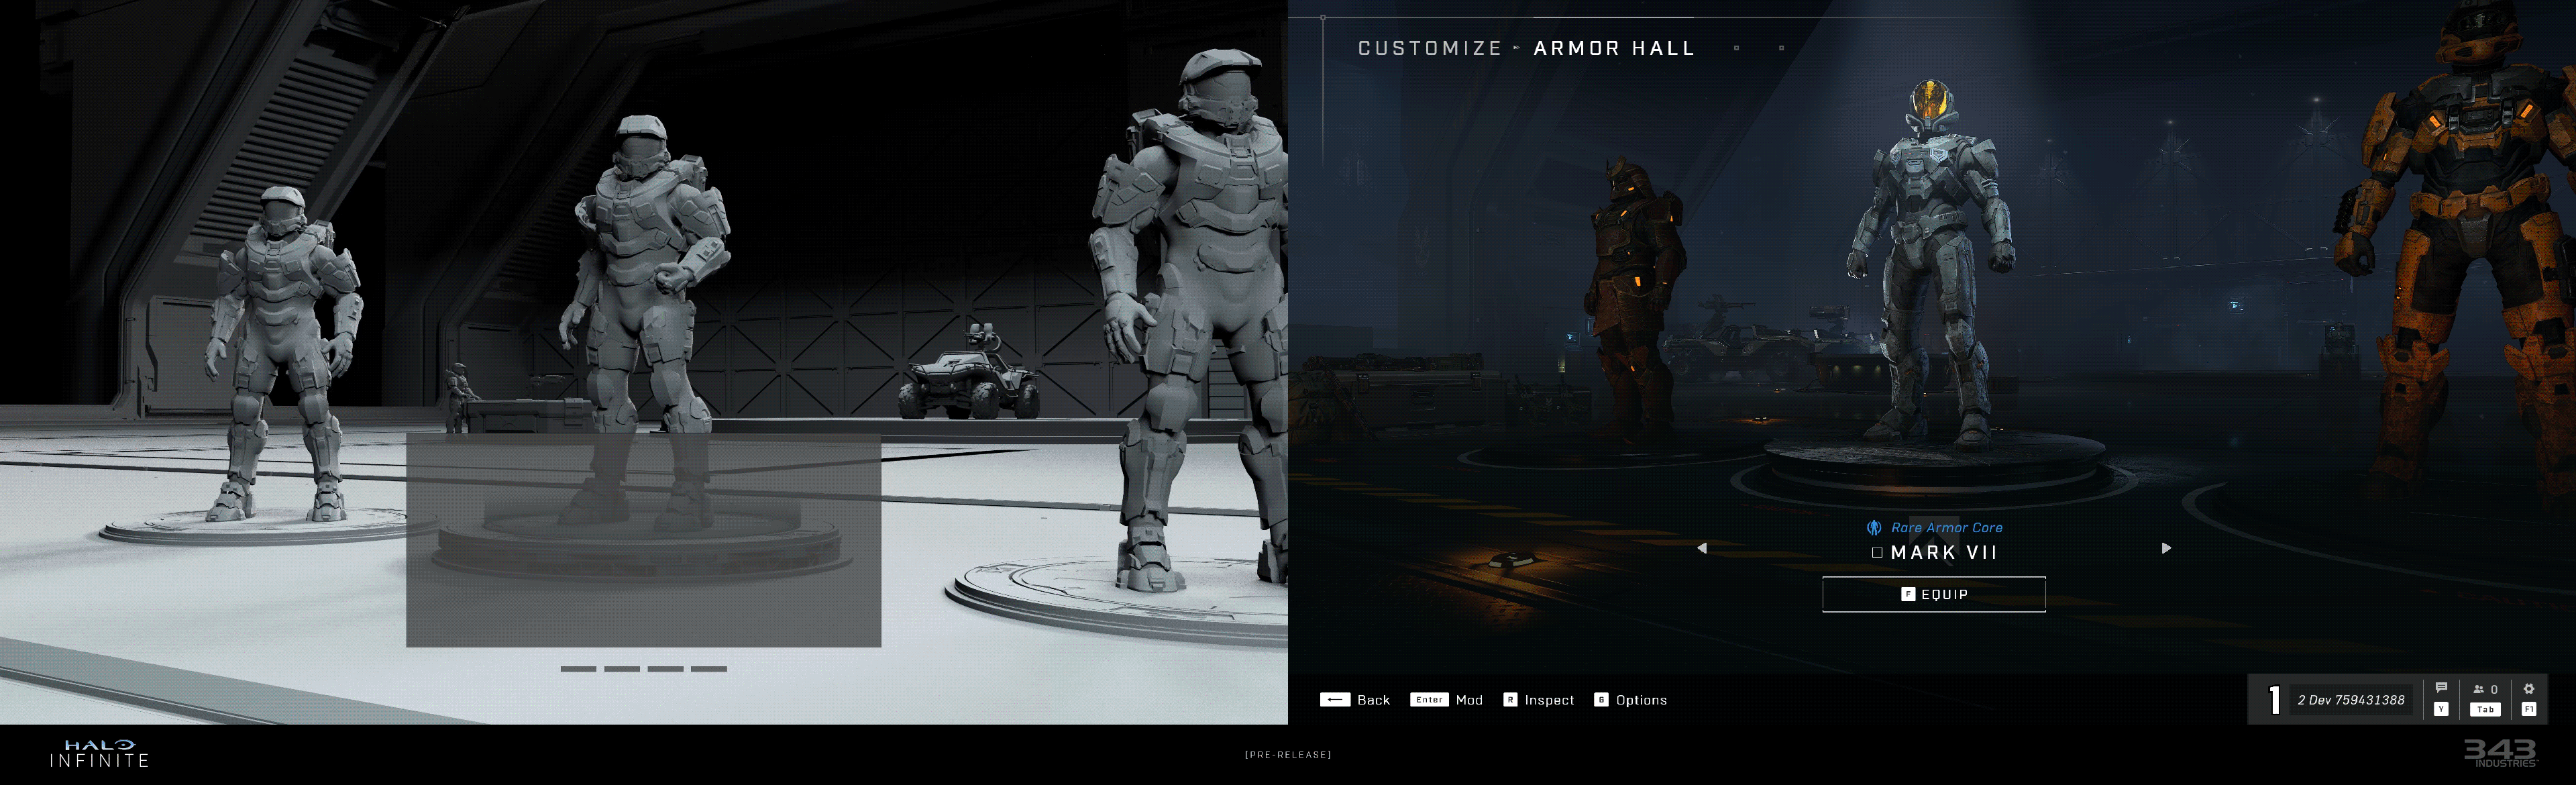 An animated GIF showing early protoytpes and the finished result for the Halo Infinite Armor Hall and customization UI.